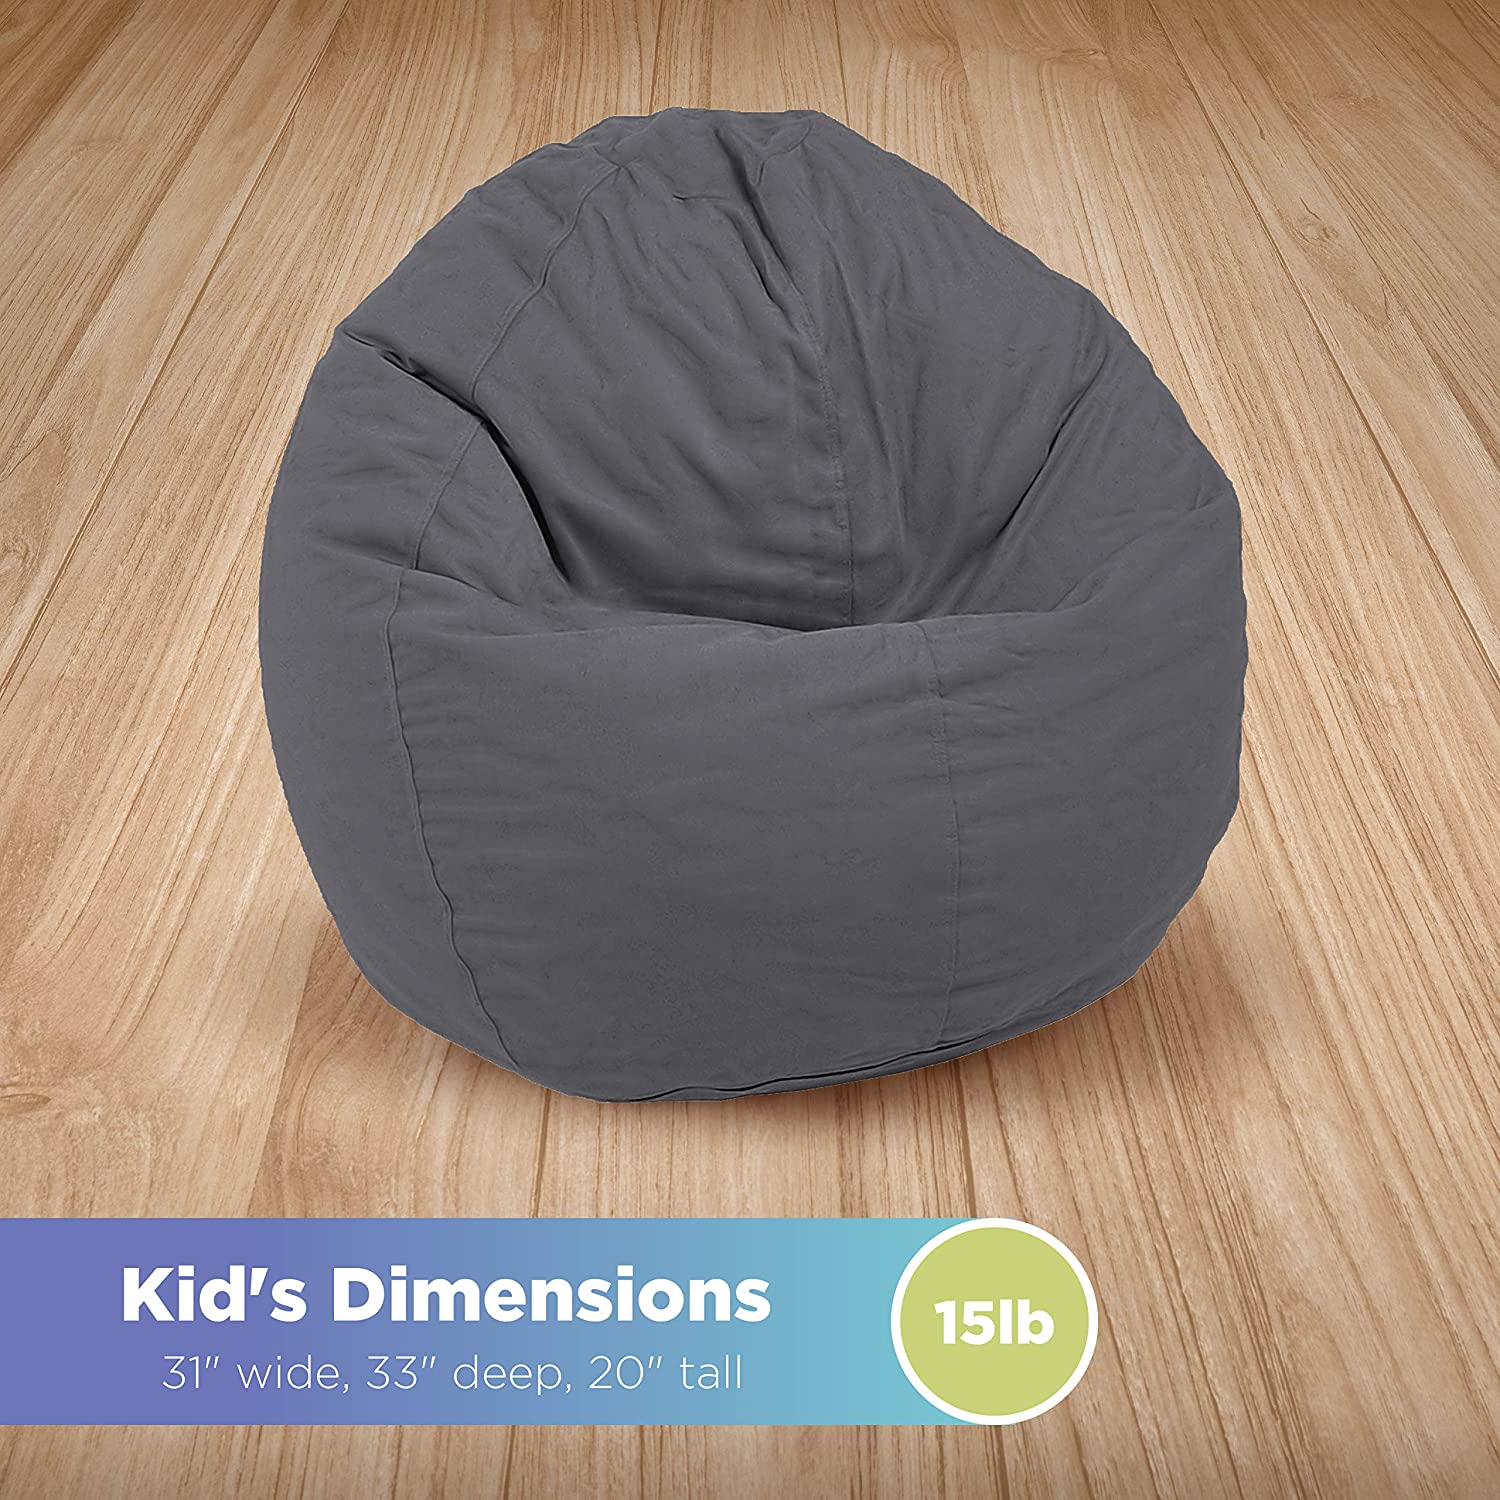 Codi Bean Bag Chair for Kids with Filler Included, 3 ft - Comfy Beanbag Chairs for Teen, Memory Foam Added - Machine Washable and Soft Mink Bonded